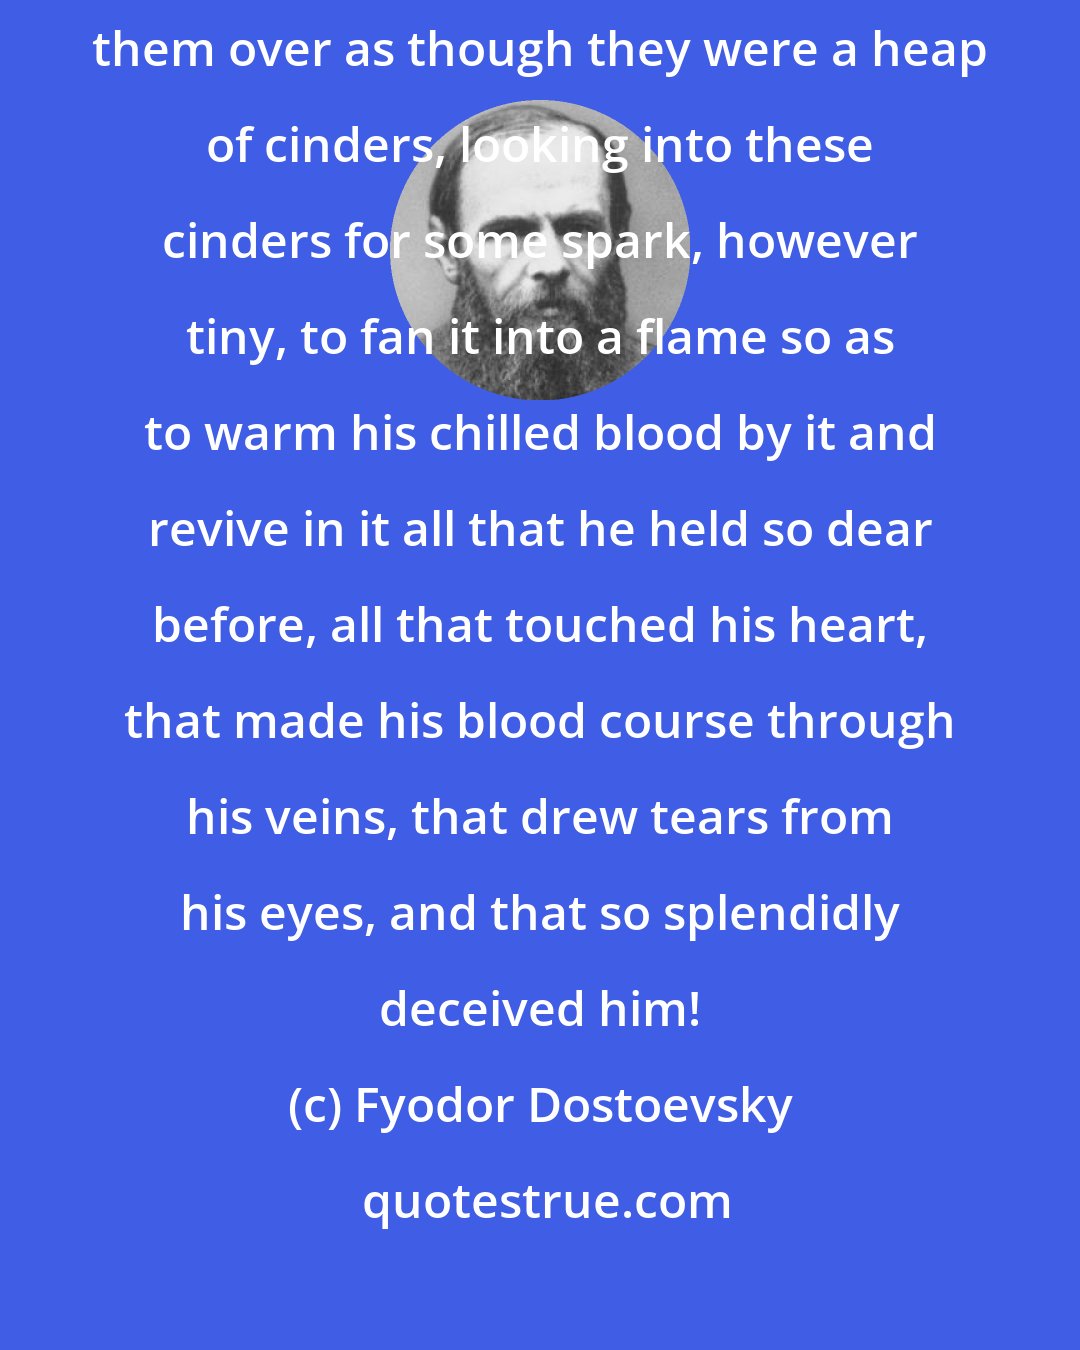 Fyodor Dostoevsky: And in vain does the dreamer rummage about in his old dreams, raking them over as though they were a heap of cinders, looking into these cinders for some spark, however tiny, to fan it into a flame so as to warm his chilled blood by it and revive in it all that he held so dear before, all that touched his heart, that made his blood course through his veins, that drew tears from his eyes, and that so splendidly deceived him!